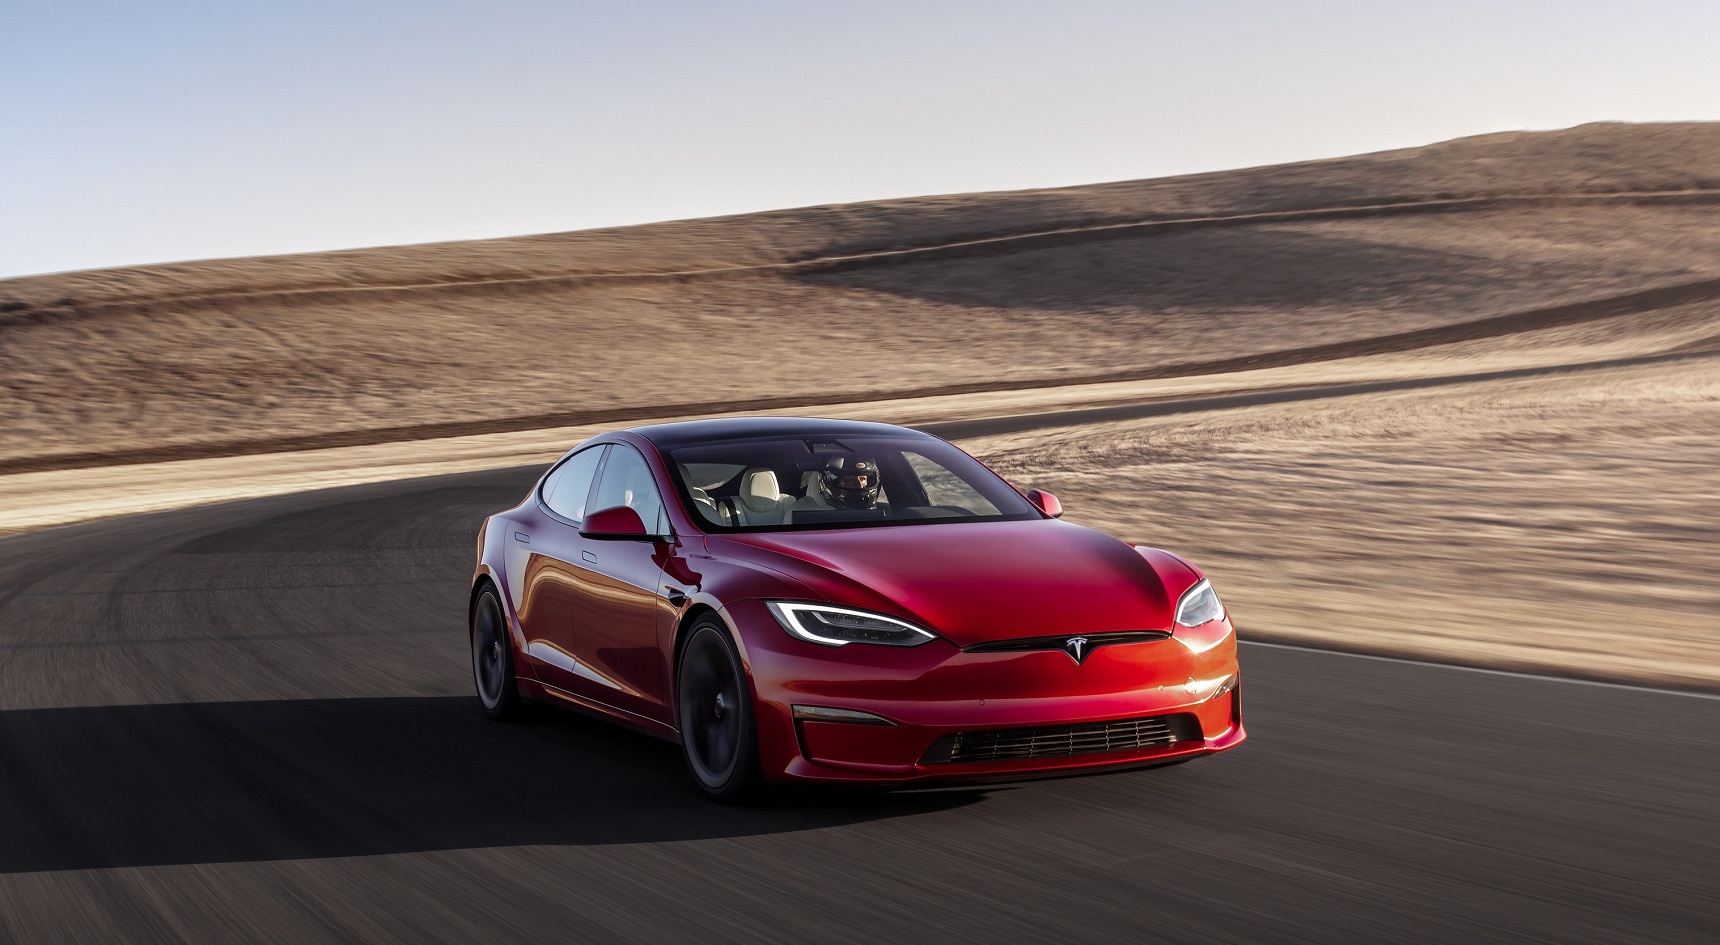 The Tesla Model S is a well-known BEV. IMAGE: Tesla Inc